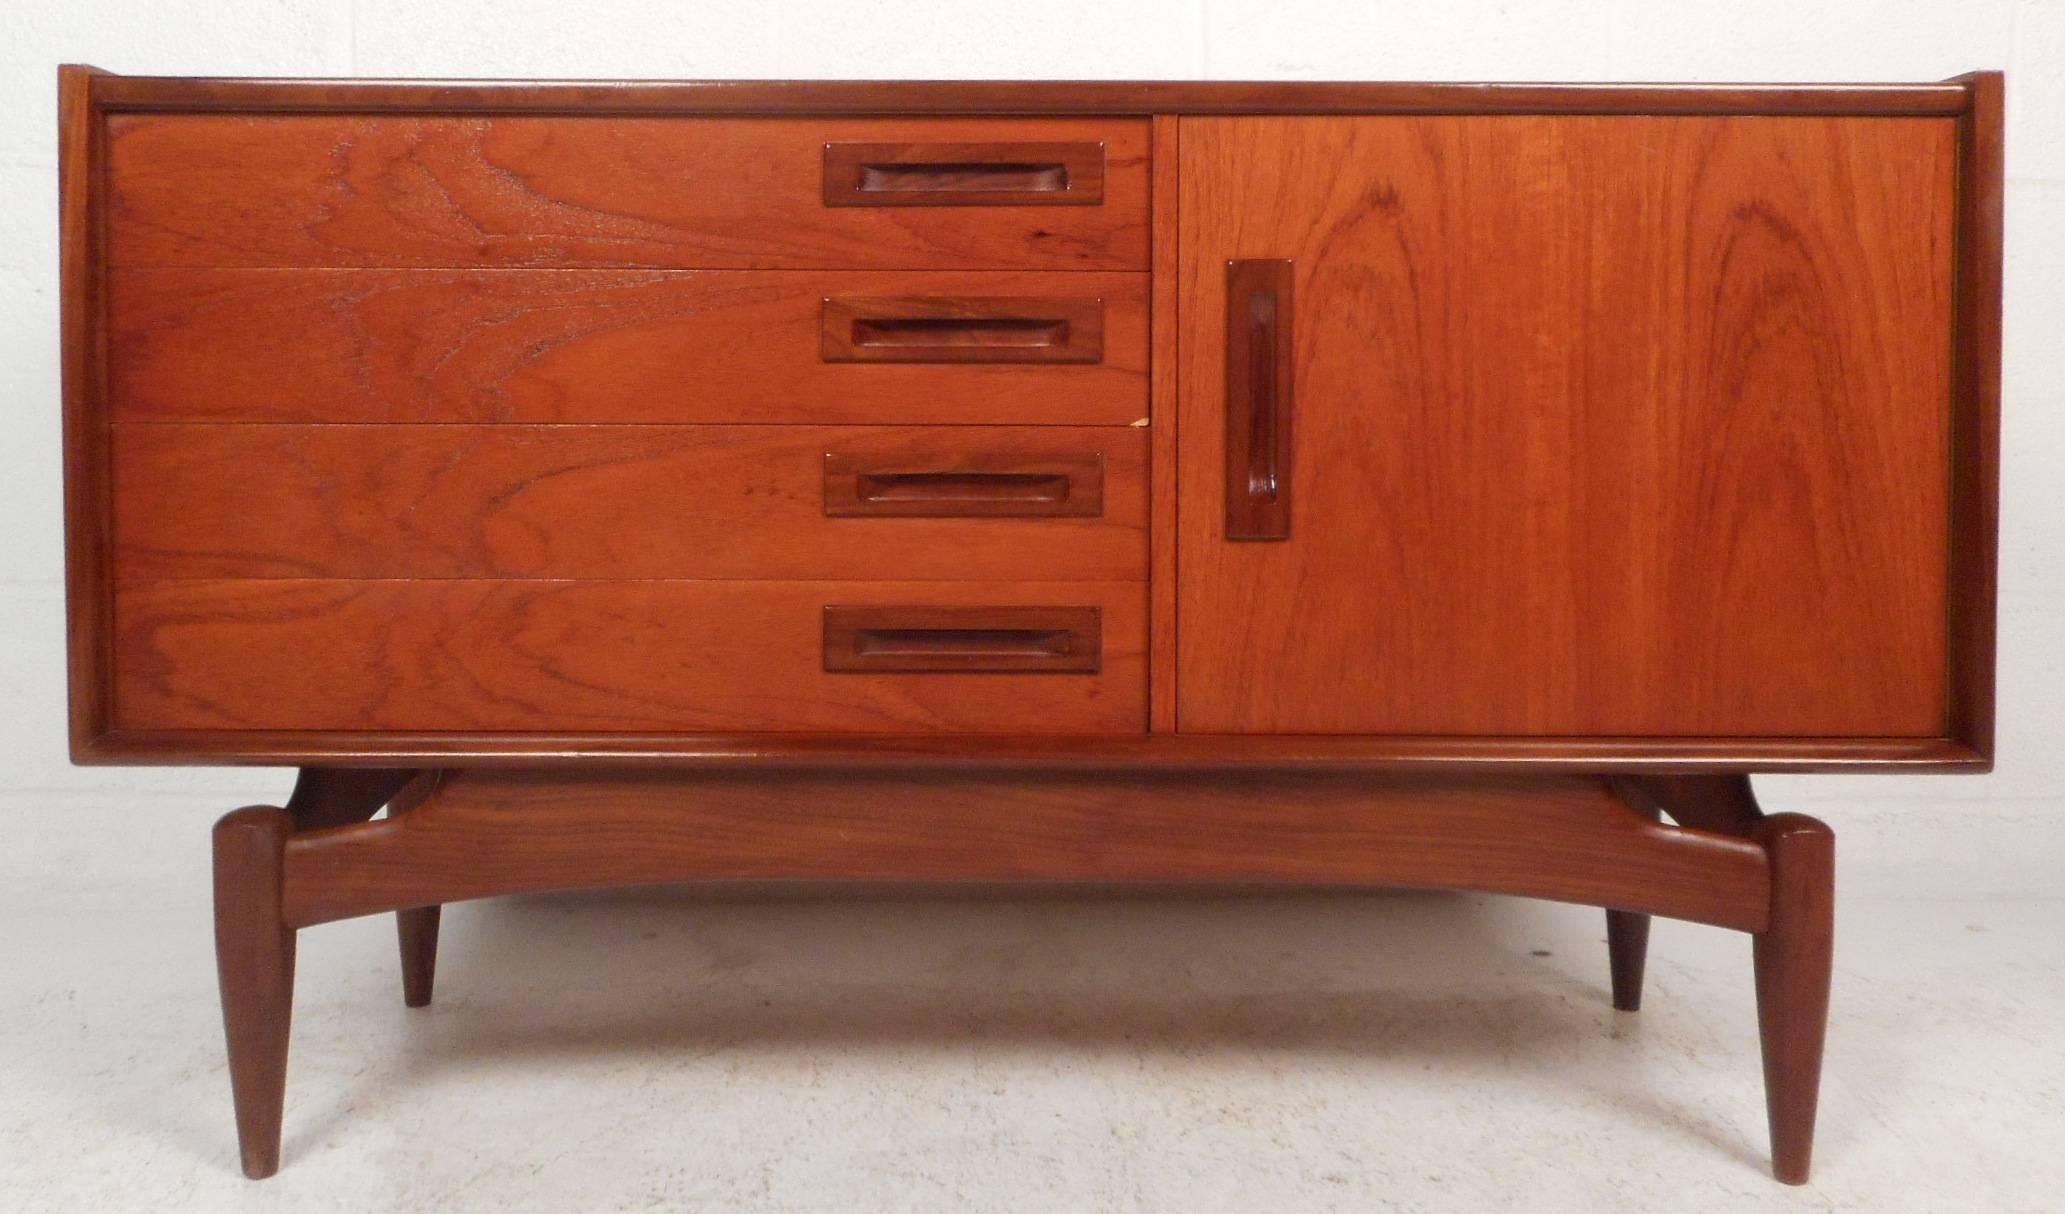 This stunning vintage modern small sideboard features a sculpted base with tapered legs. The stylish design offers plenty of room for storage in its four large drawers and compartment. Unique carved rectangular pulls and elegant wood grain add to